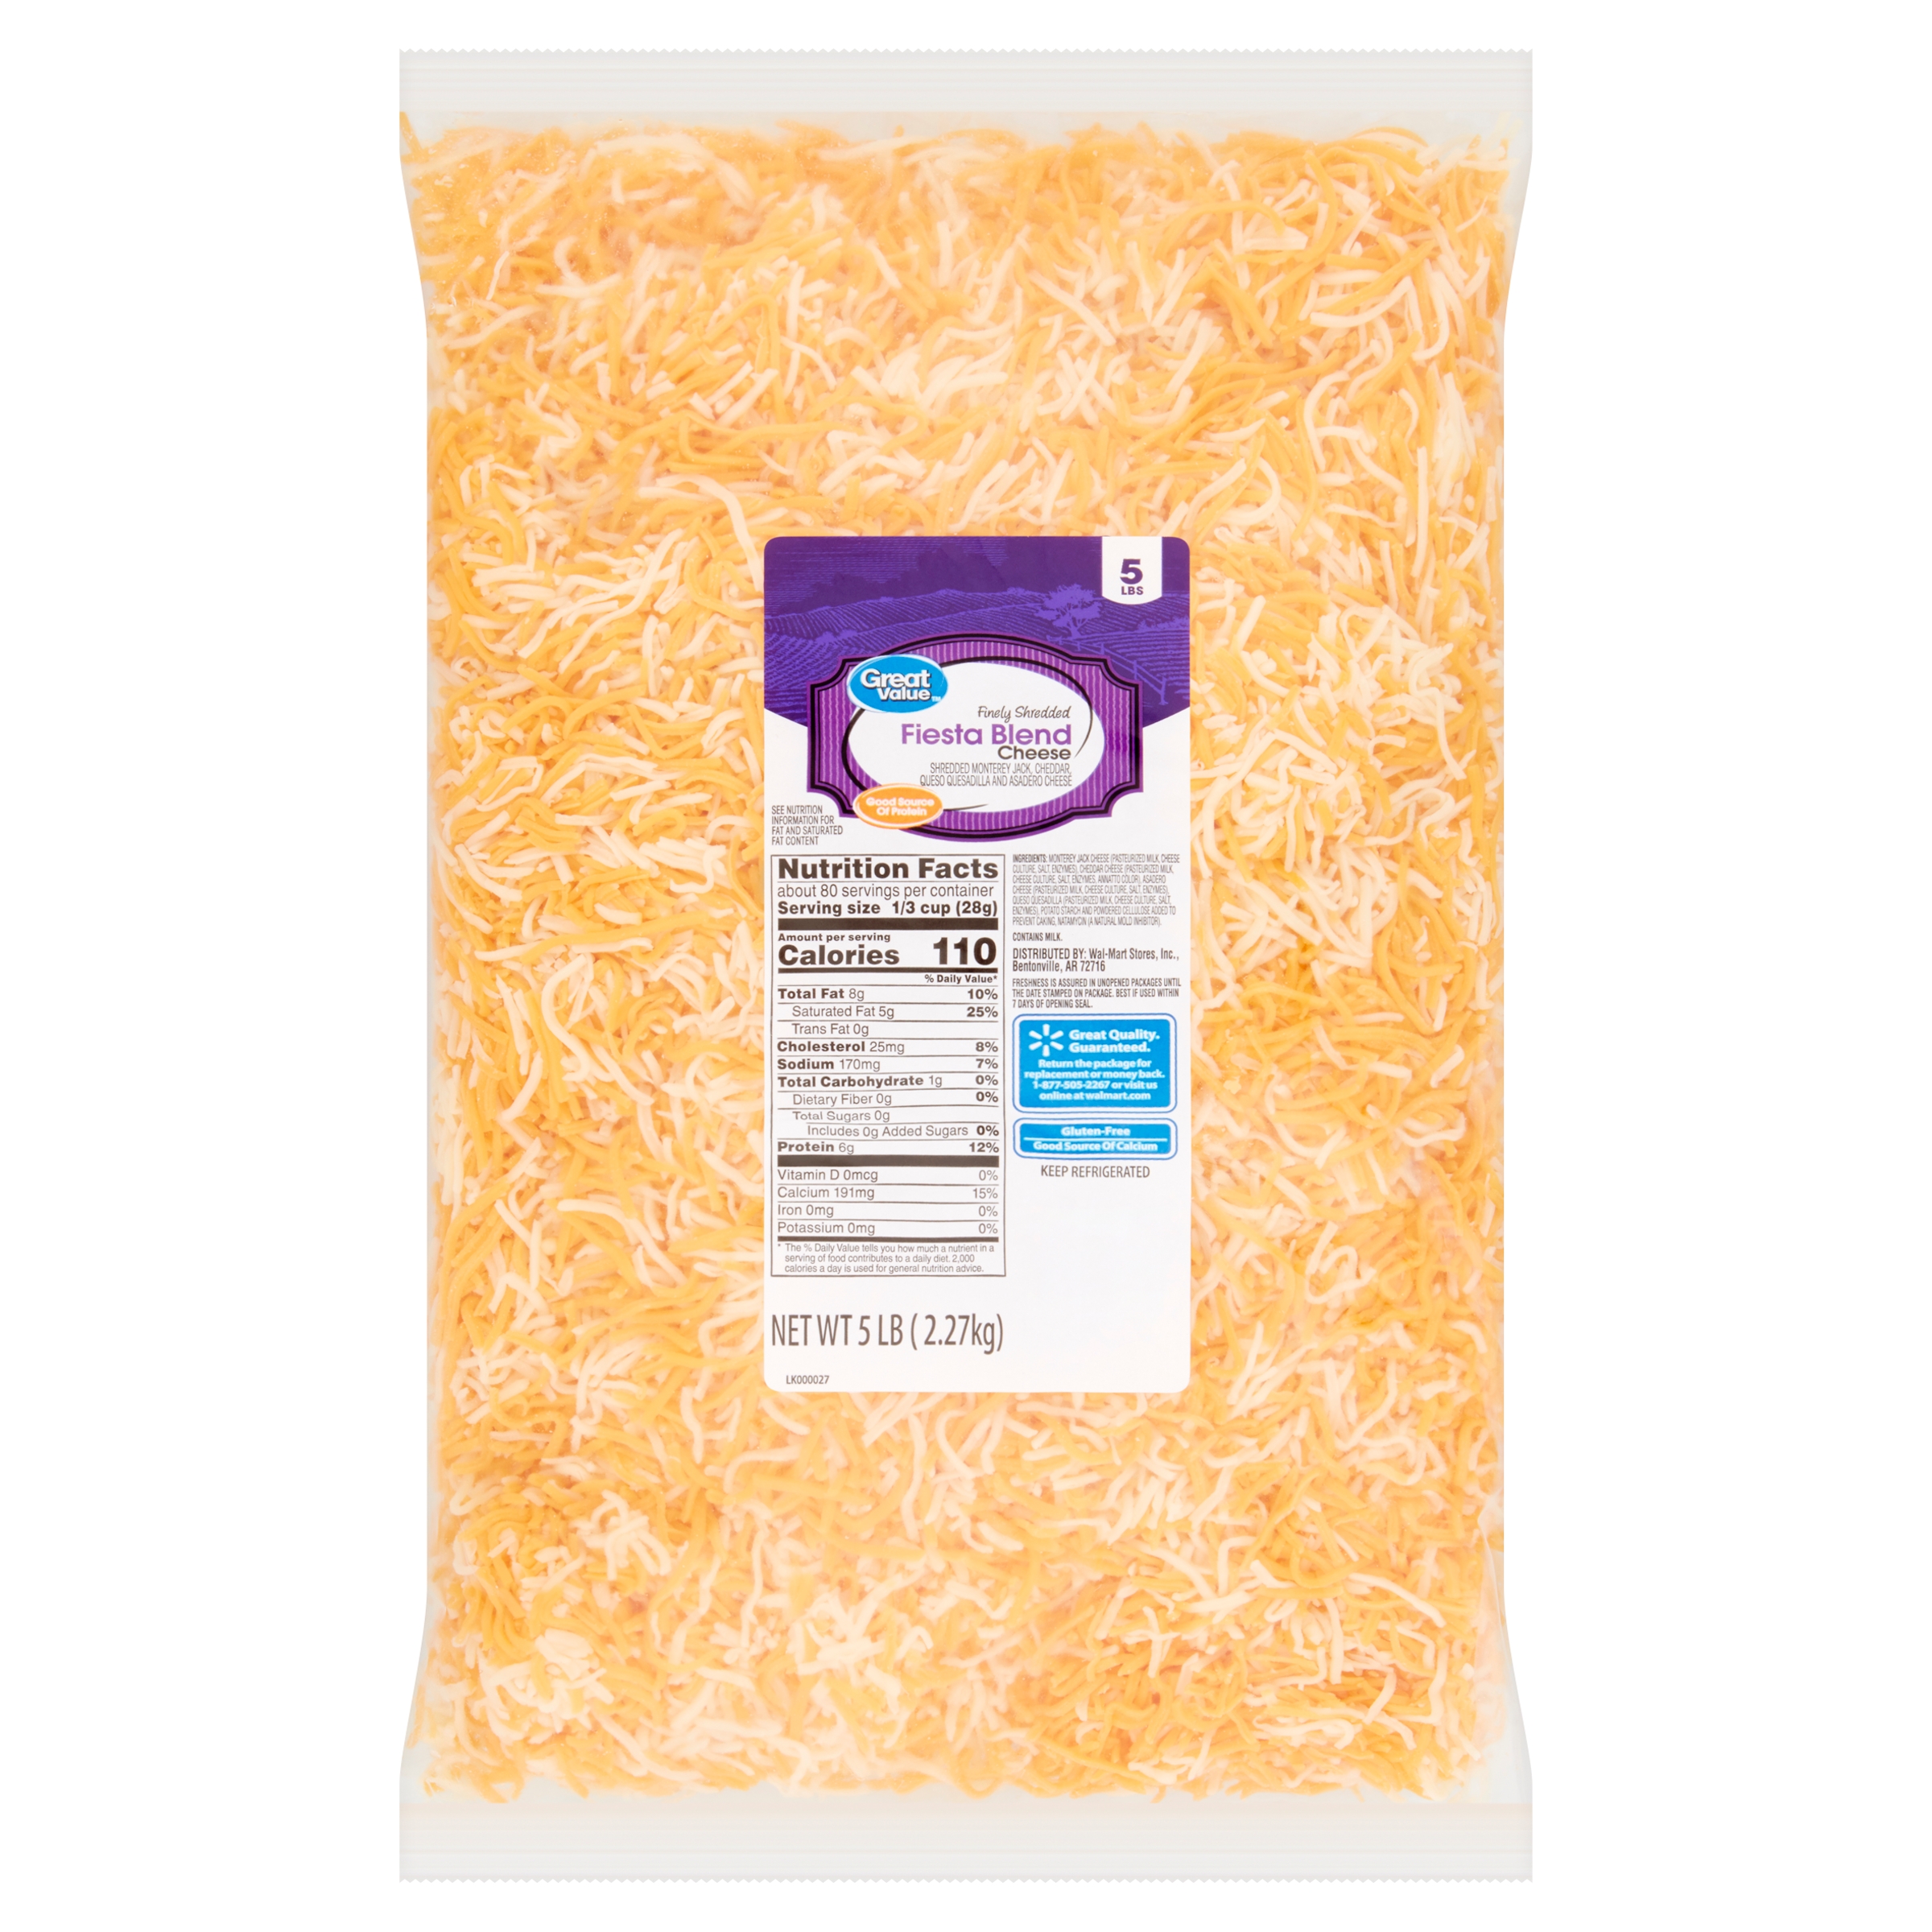 Great Value Finely Shredded Fiesta Blend Cheese, 5 Lb Image